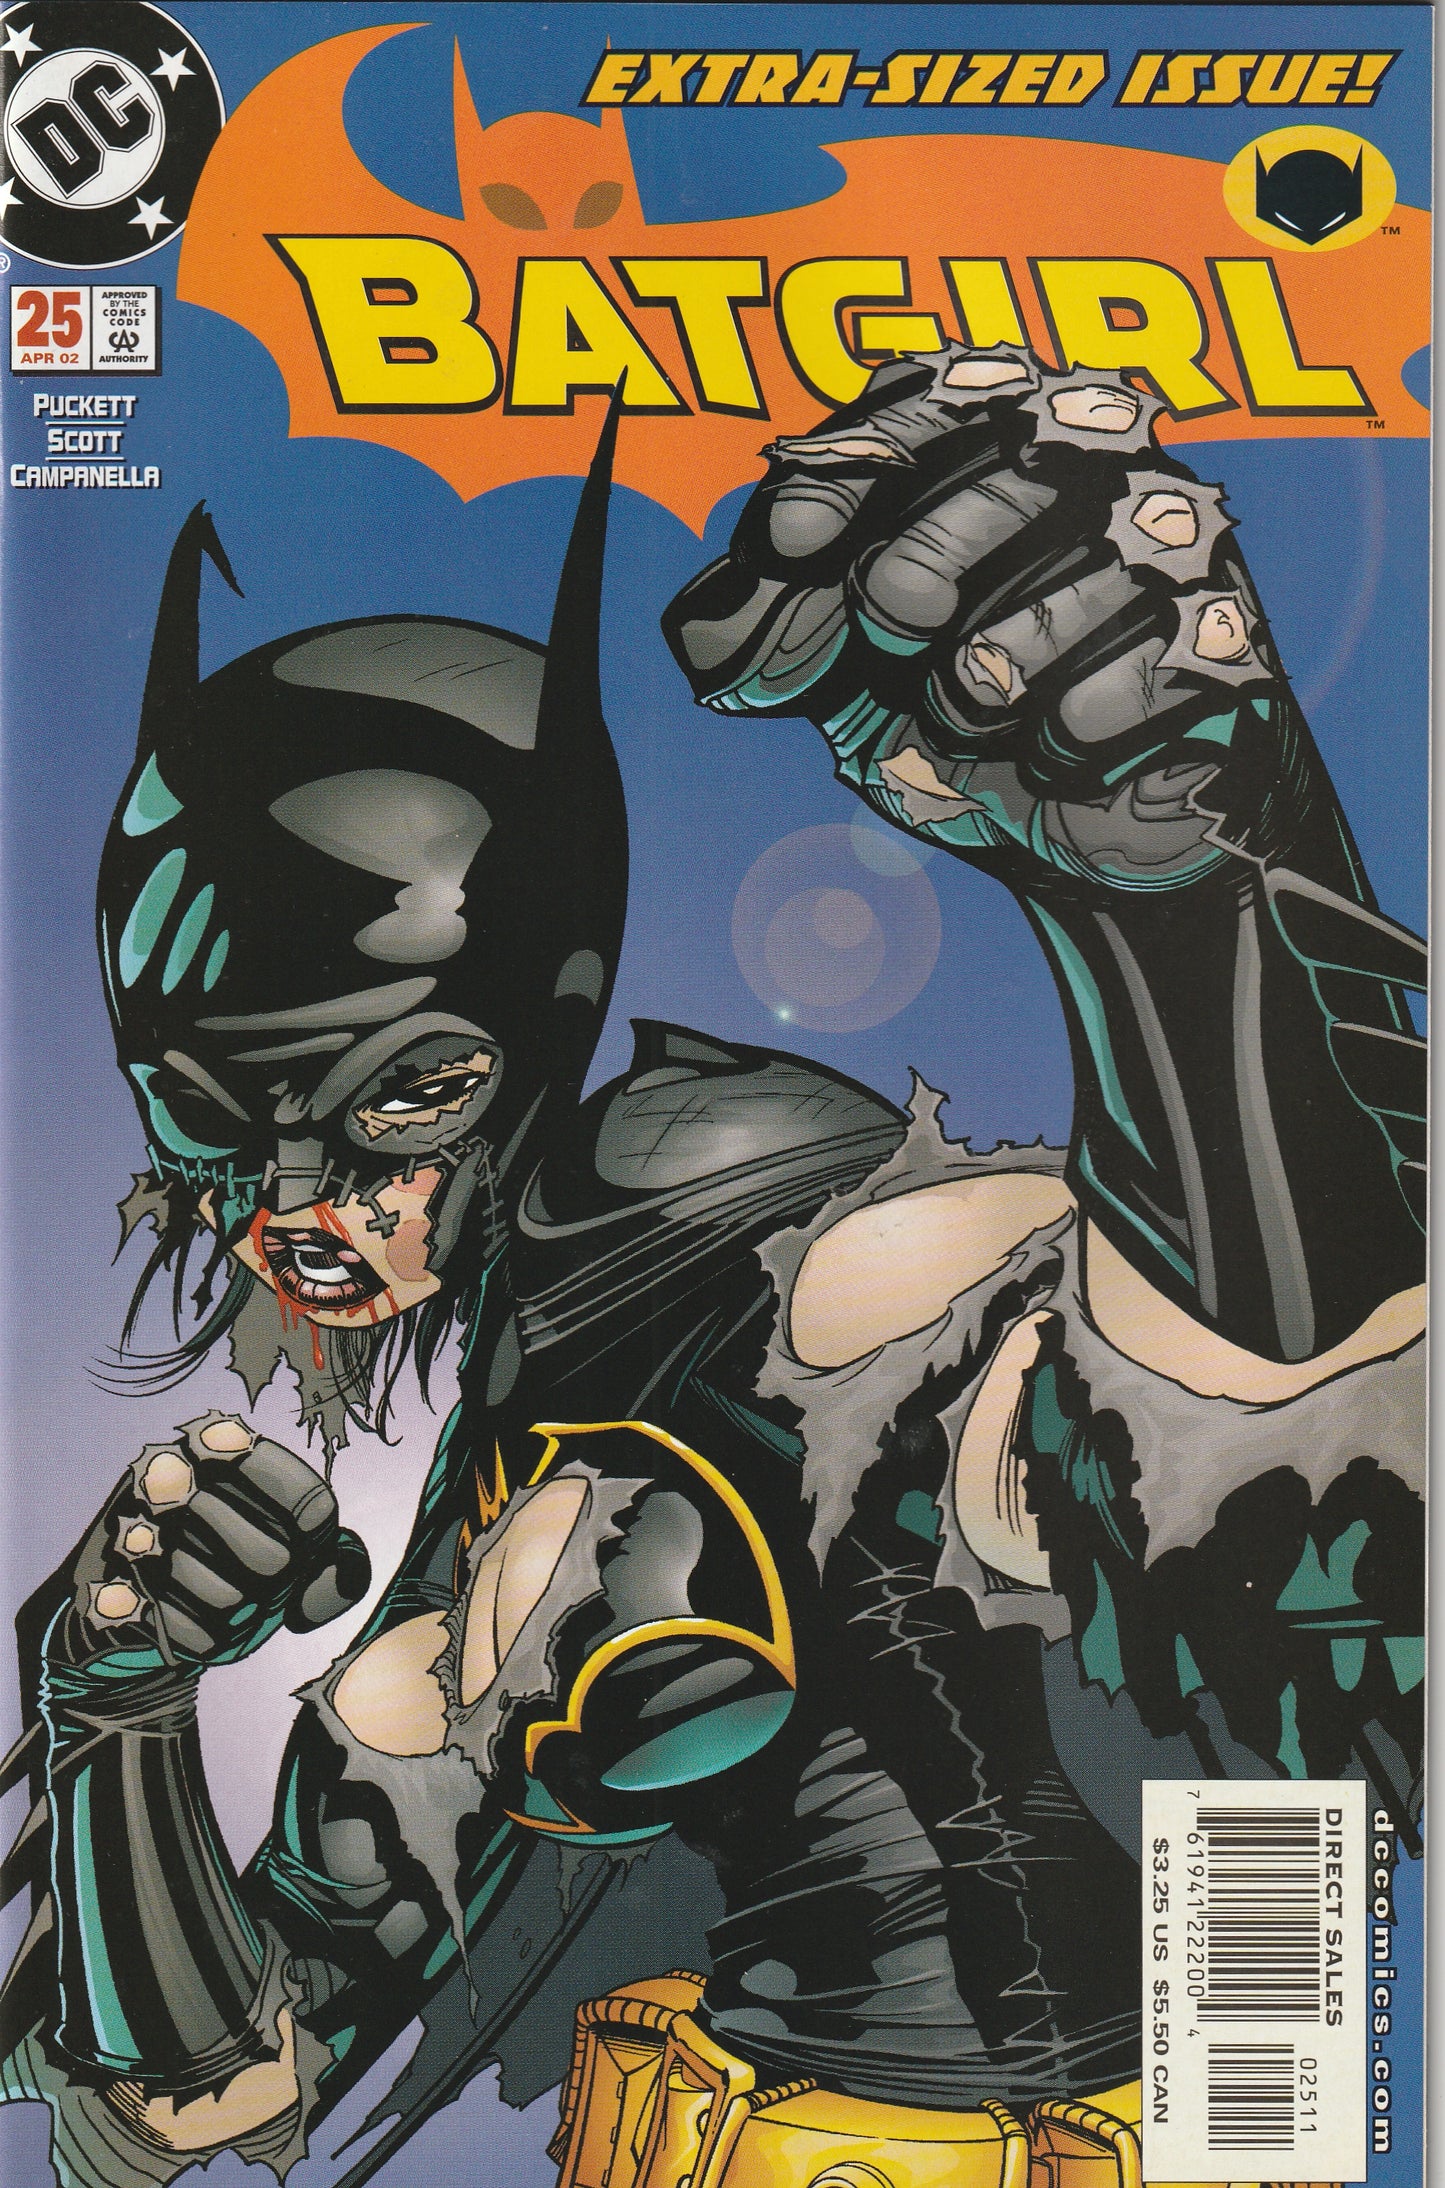 Batgirl #25 (Vol 1, 2002) - Extra sized issue